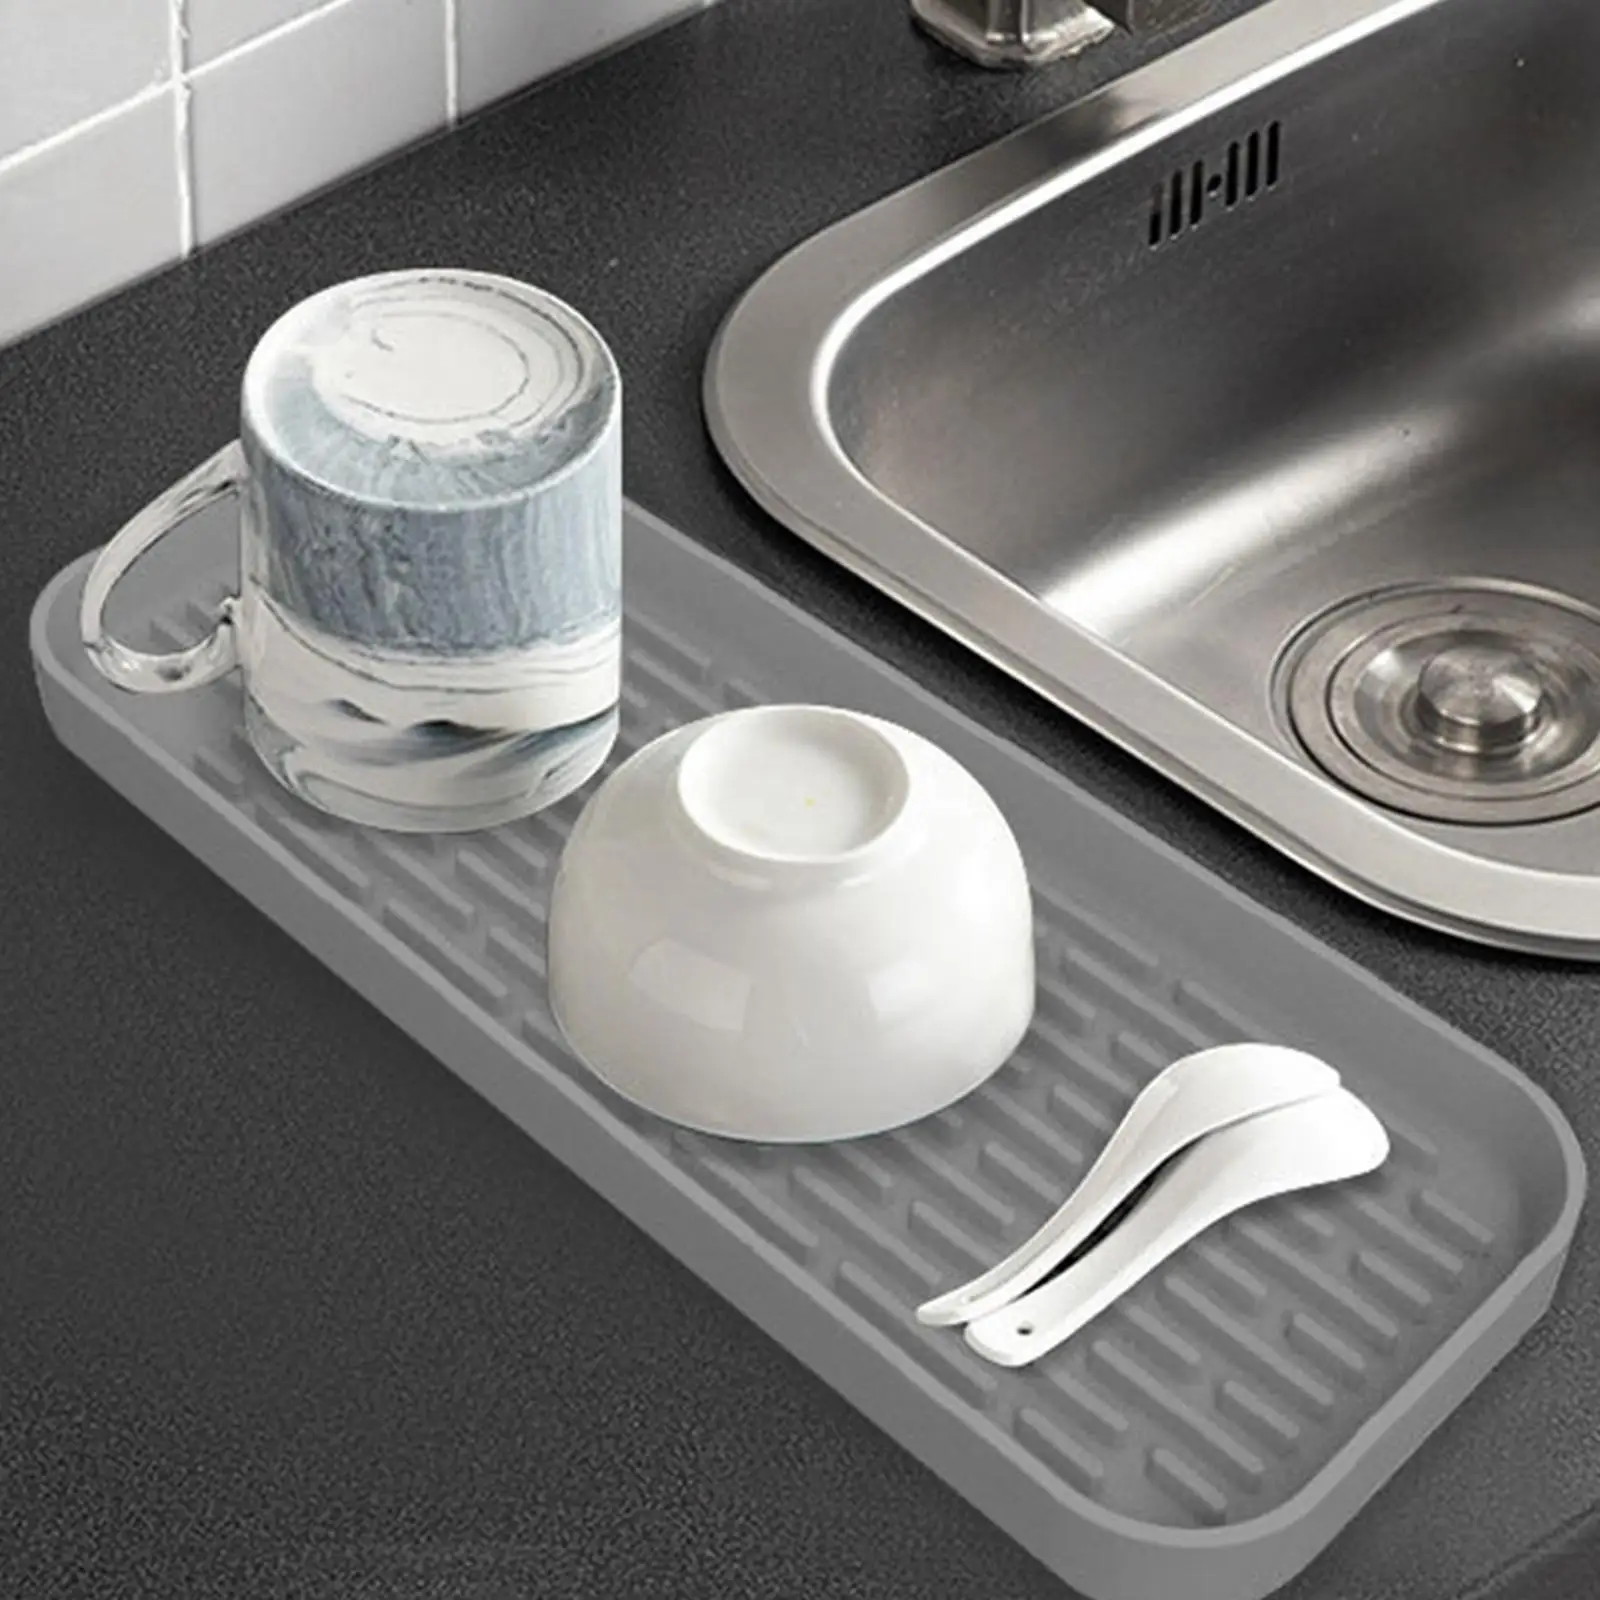 Silicone Tray Waterproof Heat Resistant Non Slip Protector Mats Tableware Organizer Mat Sink Drainer Pad for Kitchen Household